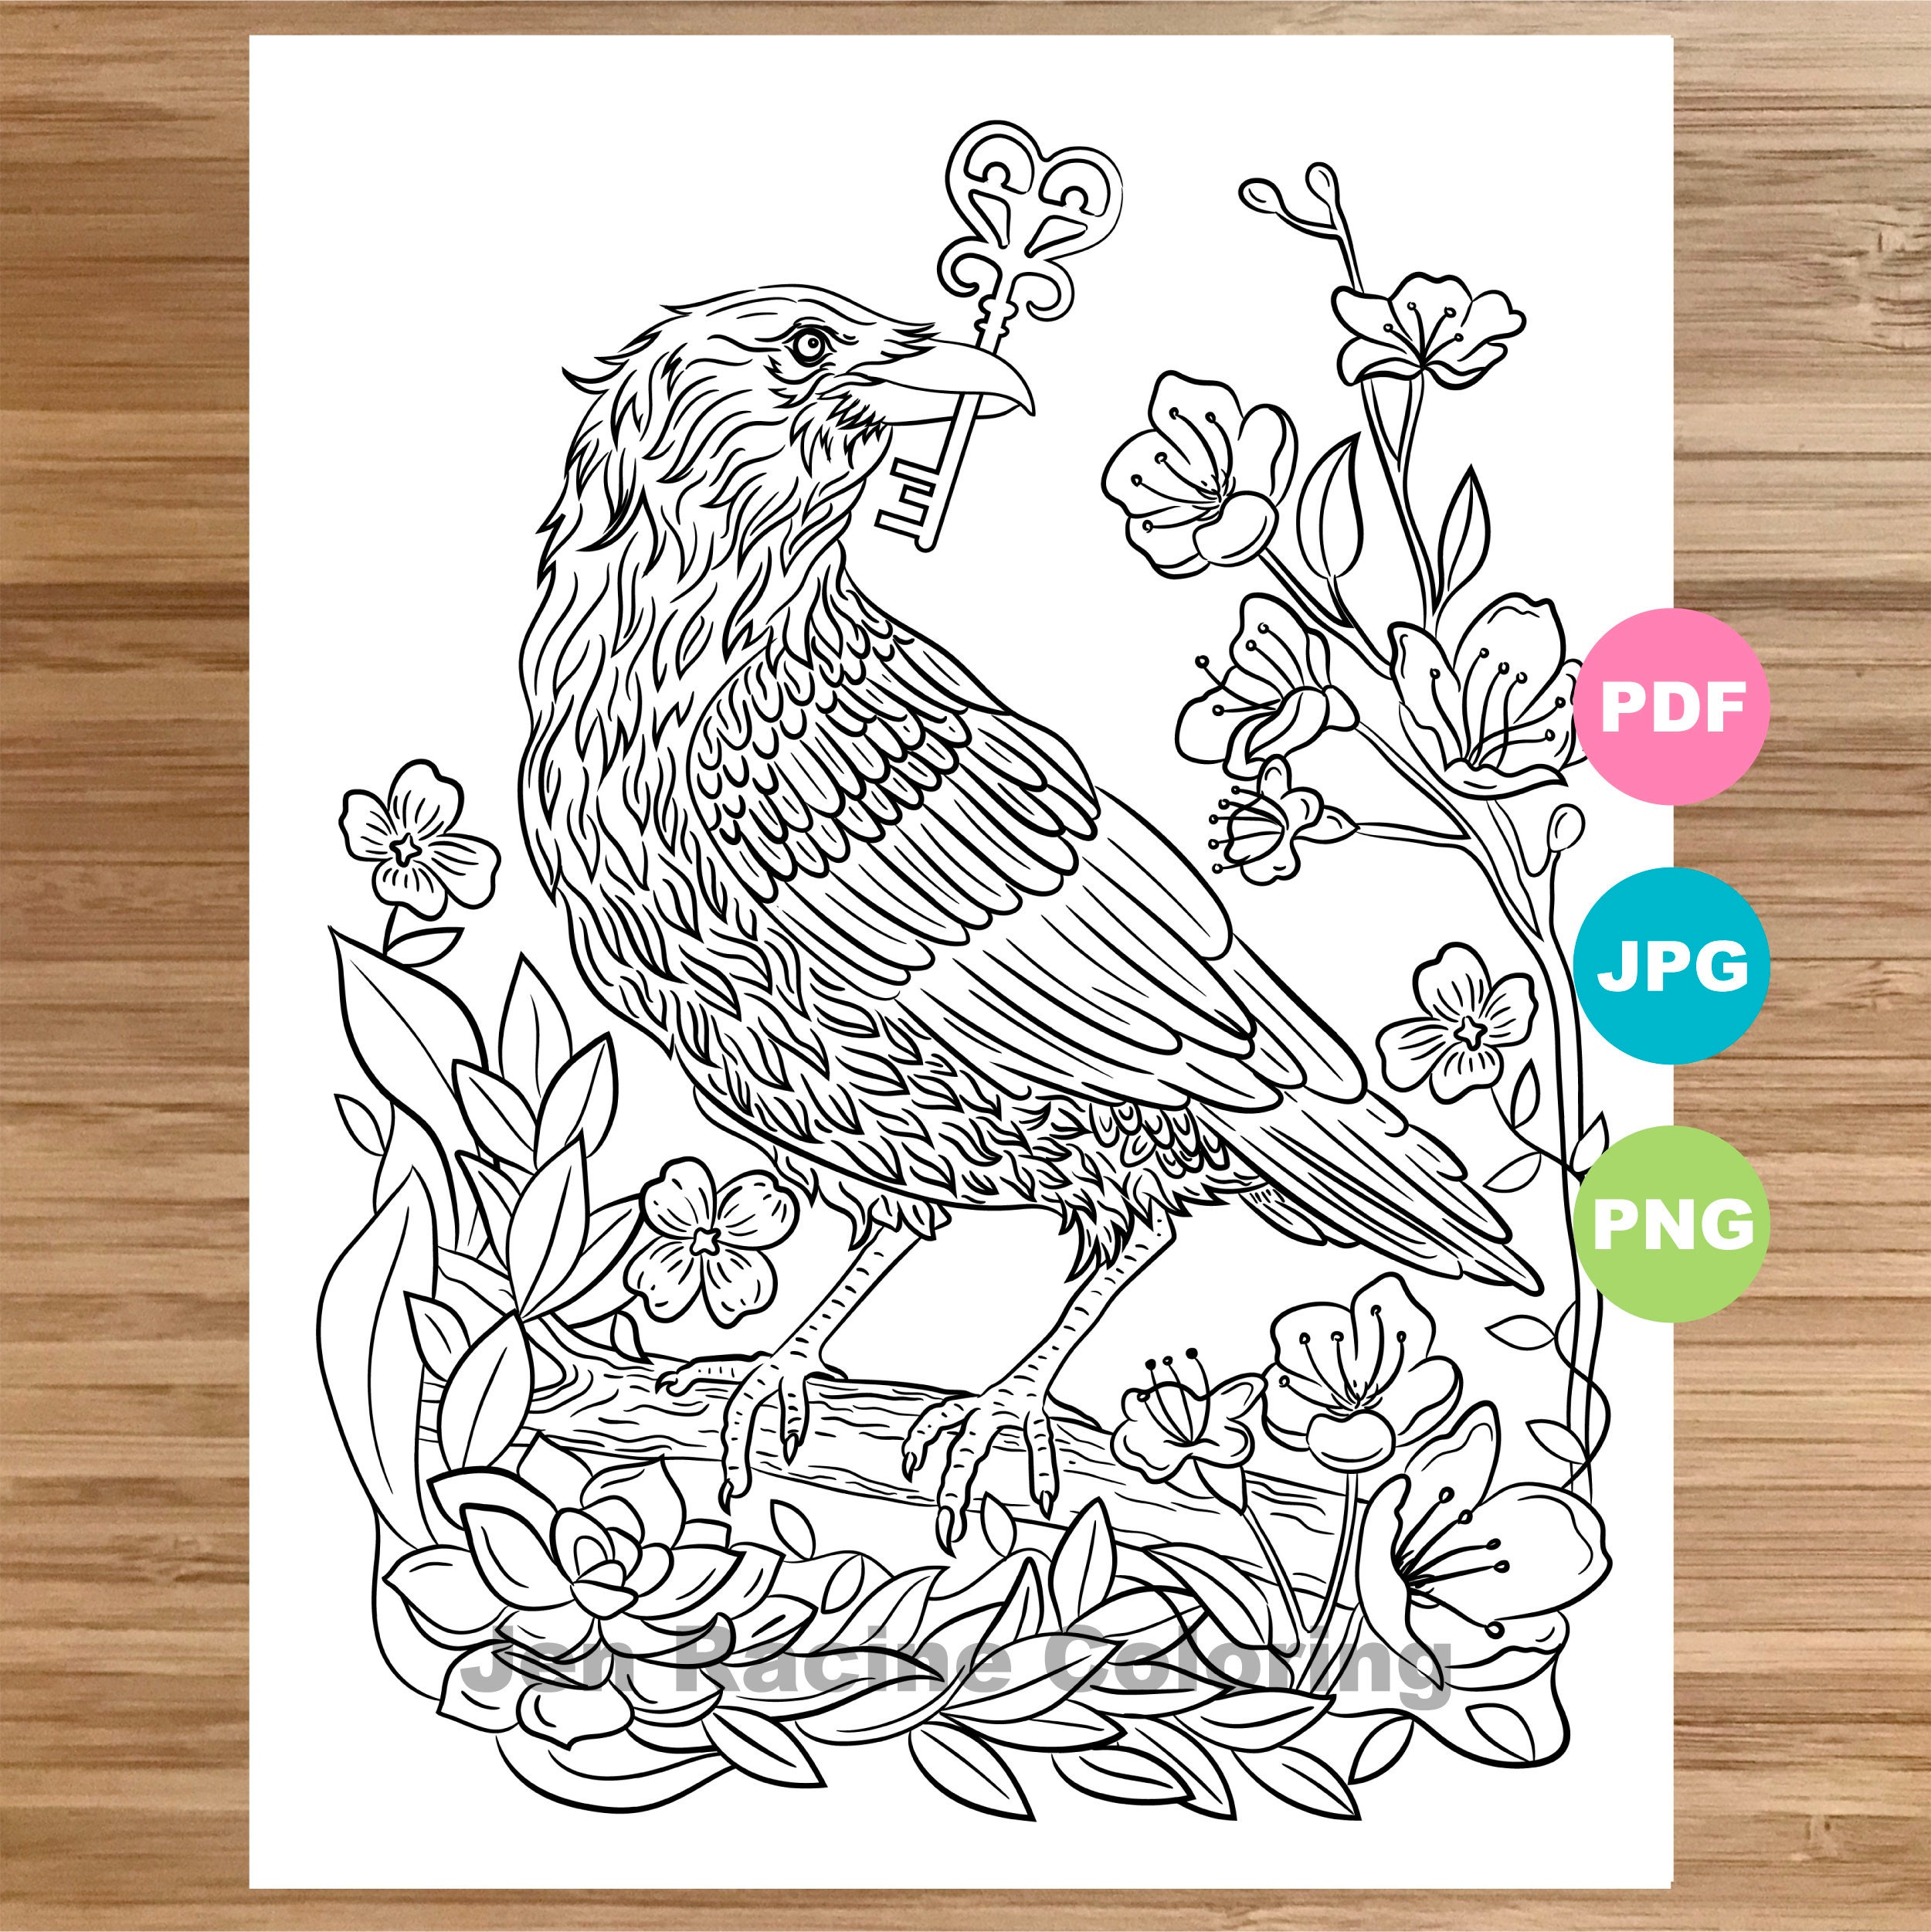 Raven coloring page magical animal animal art coloring page printable coloring pages for adults coloring pages for kids download now